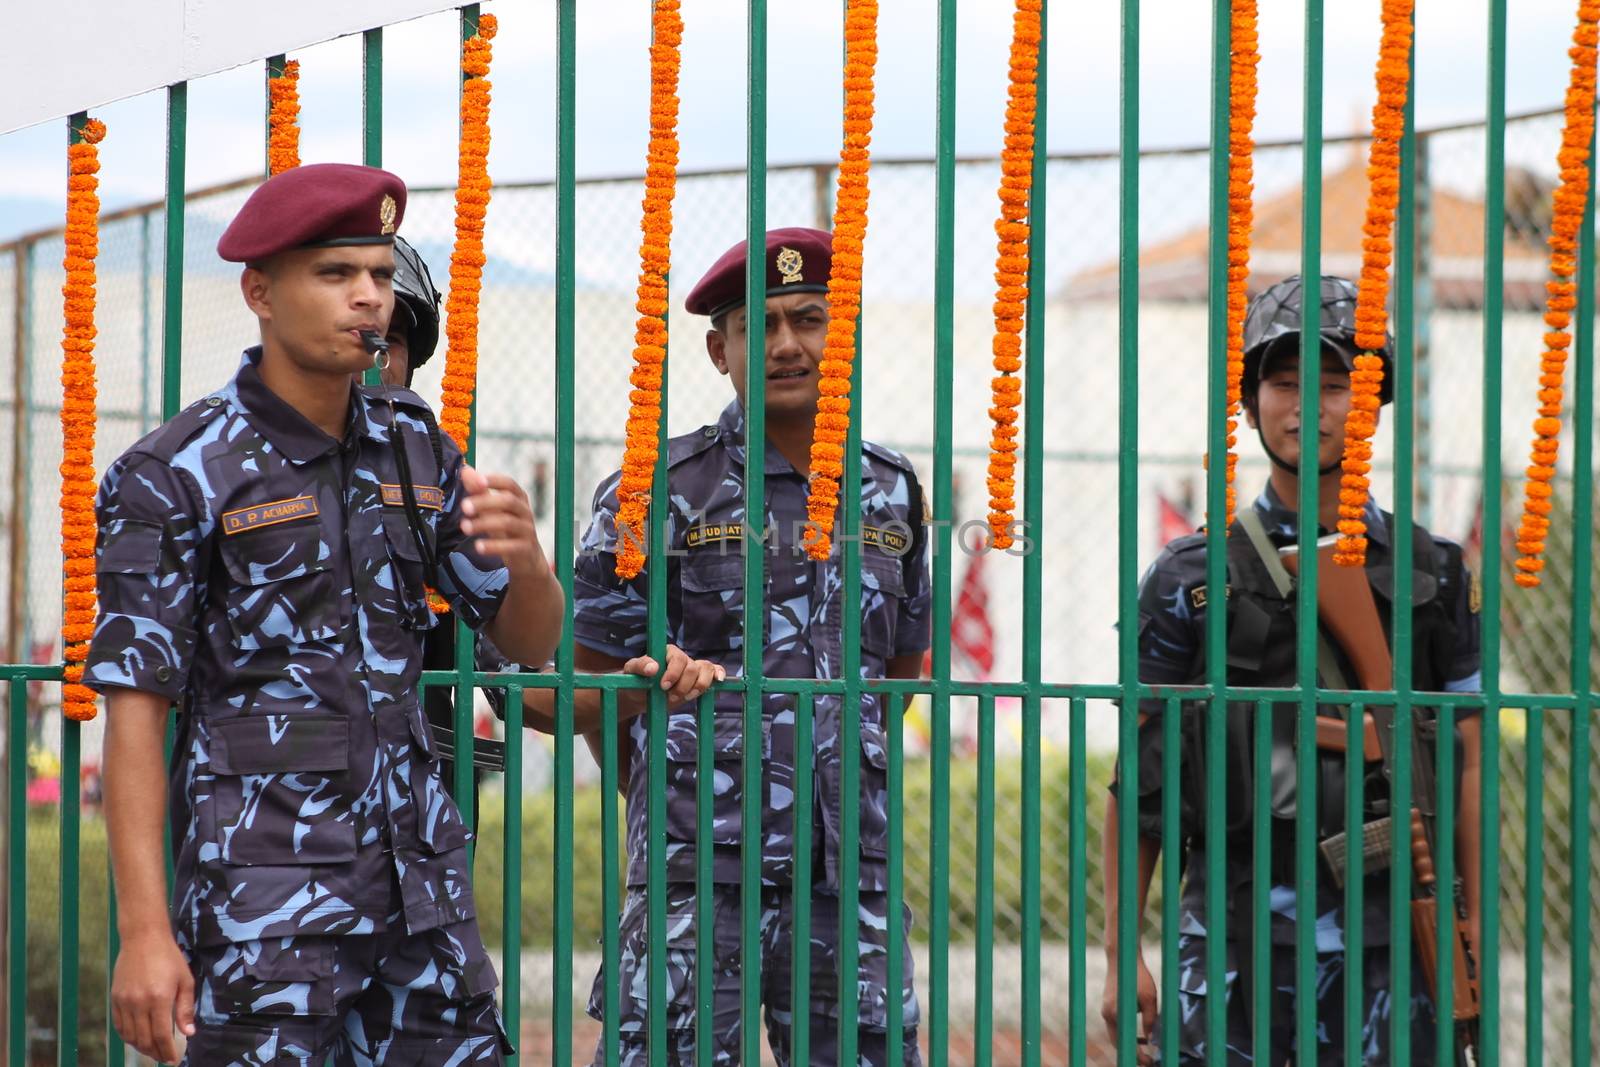 NEPAL, Kathmandu: A soldier blows in his whistle as Nepal celebrates a new constitution embracing the principles of republicanism, federalism, secularism, and inclusiveness, in Kathmandu on September 20, 2015. Out of the 598 members of the Constituent Assembly, 507 voted for the new constitution, 25 voted against, and 66 abstained in a vote on September 16, 2015. The event was marked with protests organized by parties of the Tharu and Madhesi ethnic communities, which according to Newzulu contributor Anish Gujarel led to violence in Southern Nepal.